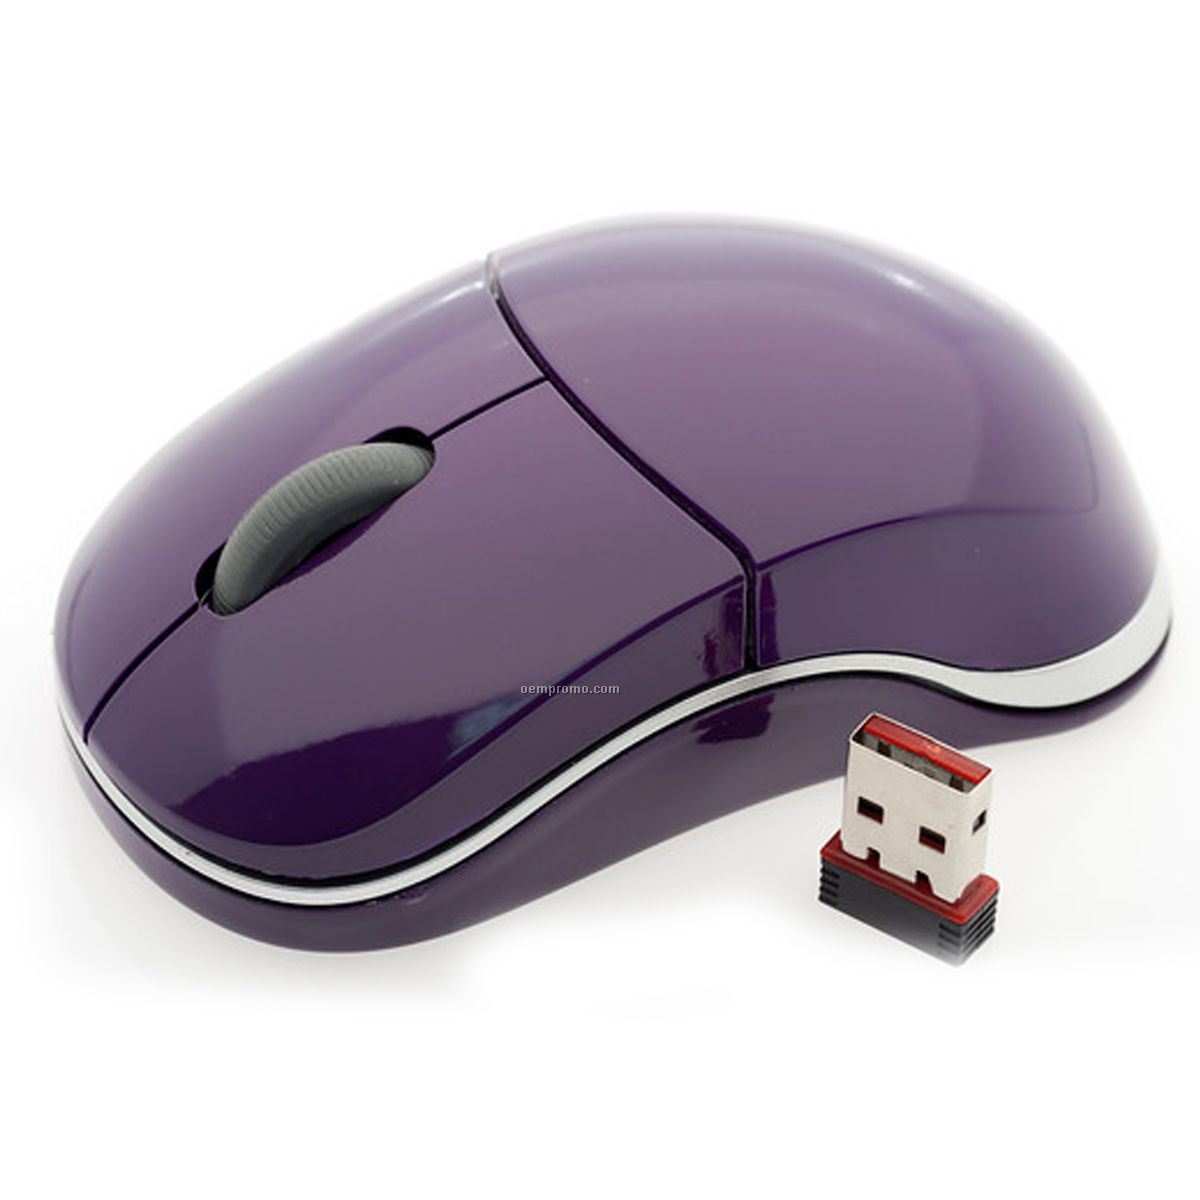 Click Wireless Optical Mouse